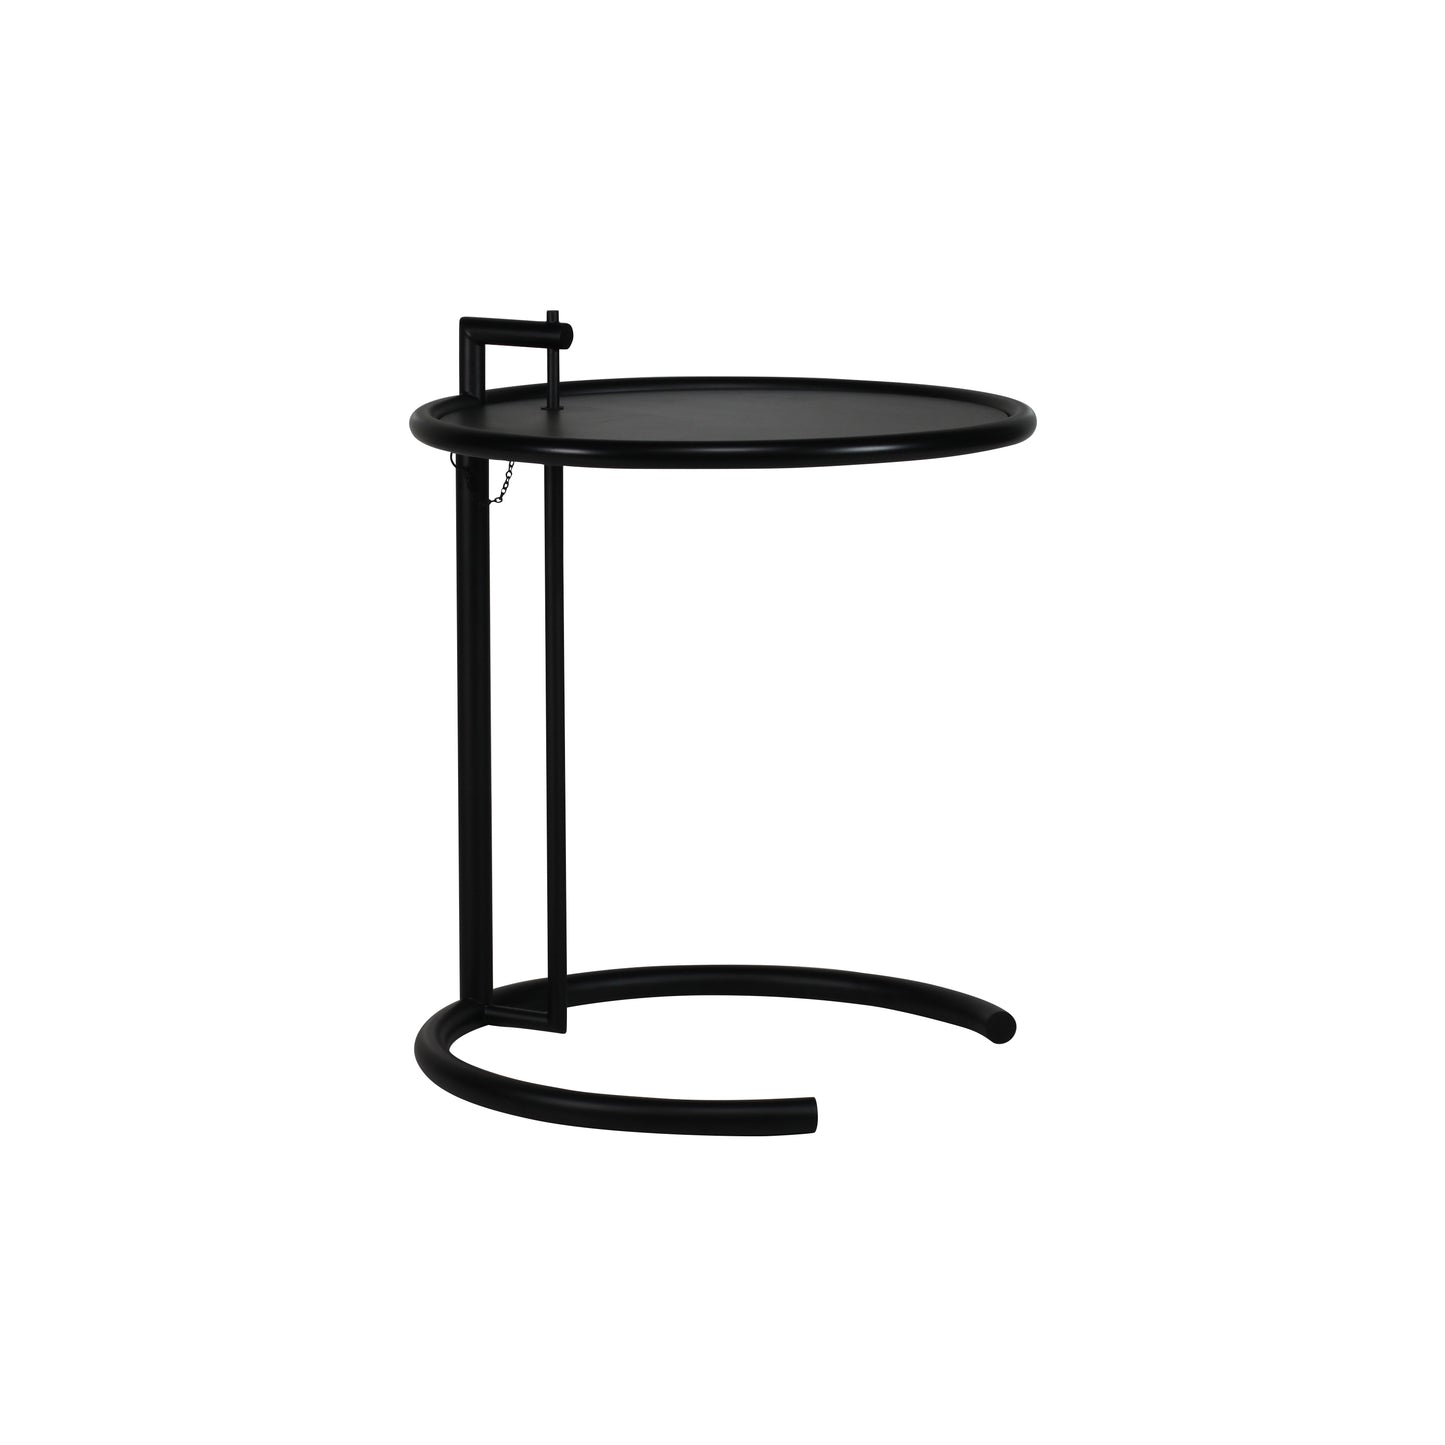 Adjustable table style | Black lacquered  Black laqueredc metal top | Side